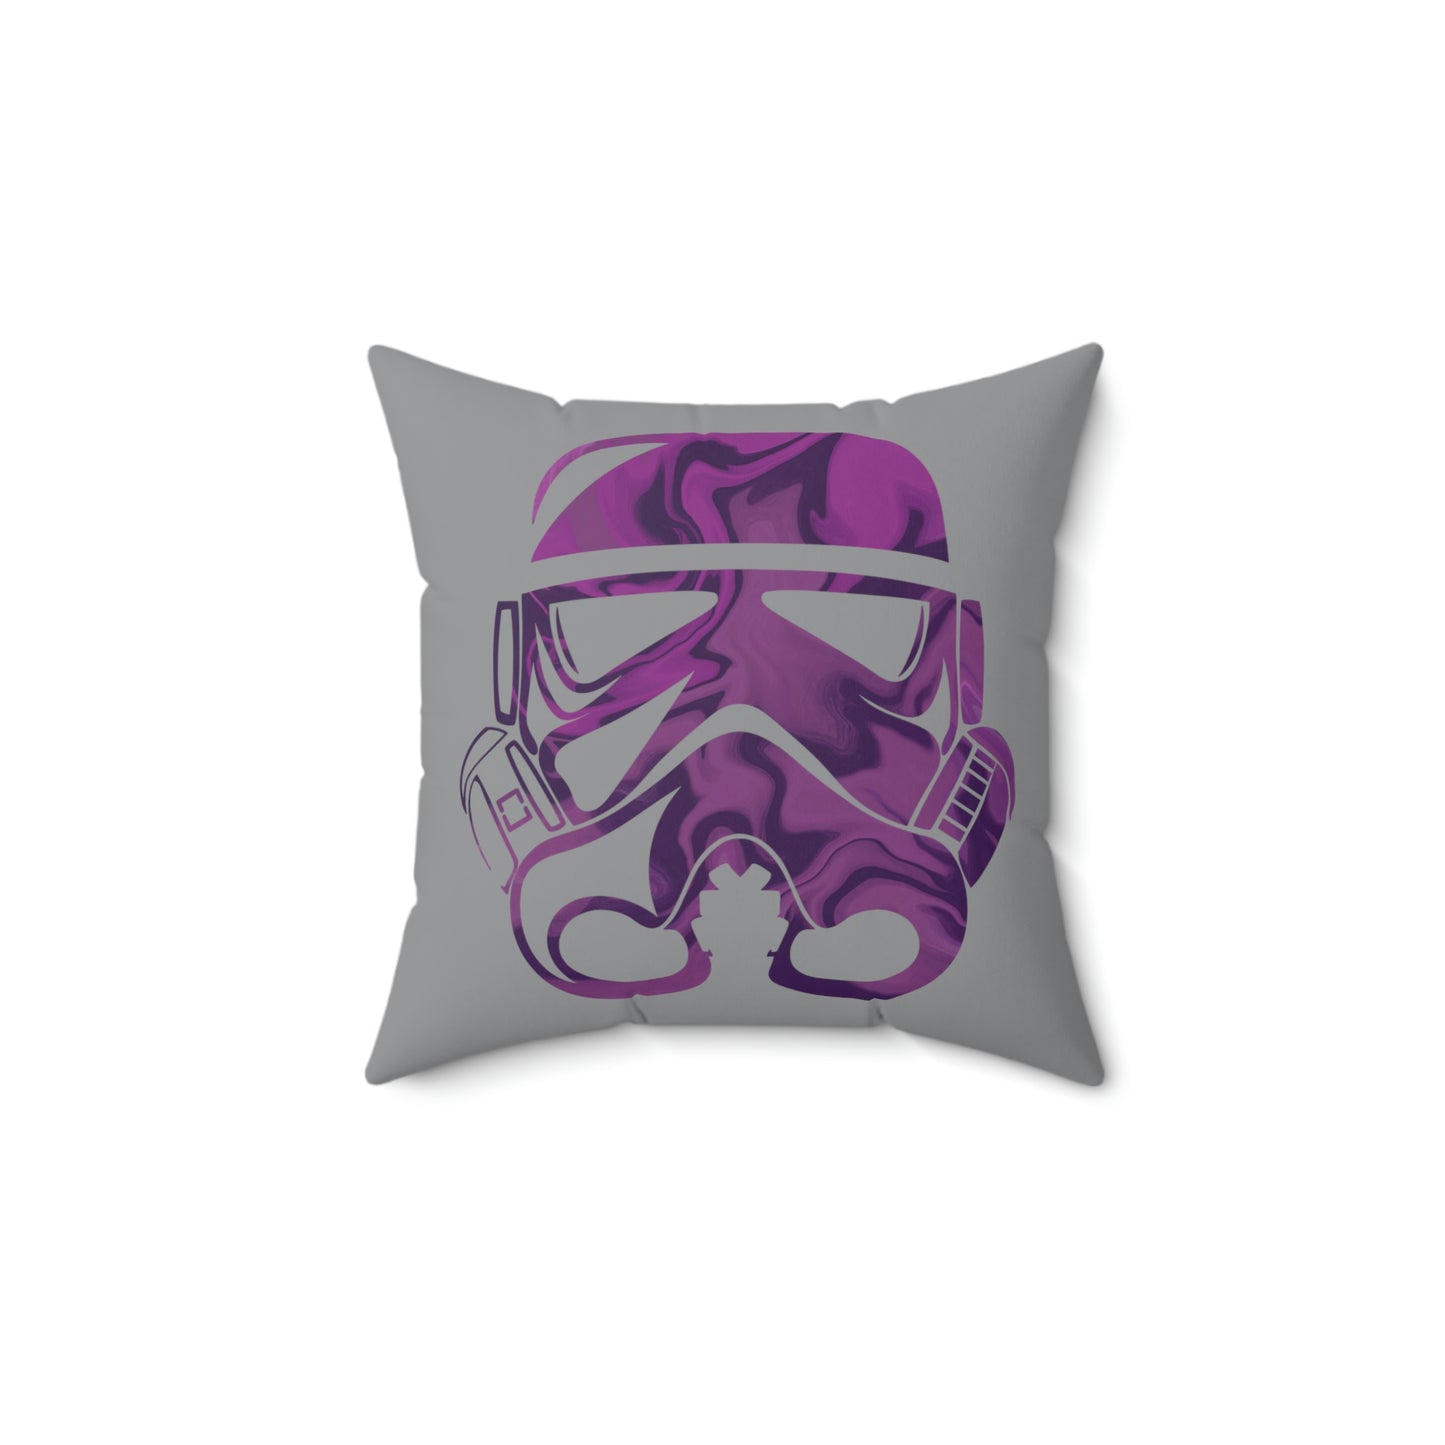 Spun Polyester Square Pillow Case ”Storm Trooper 4 on Gray”